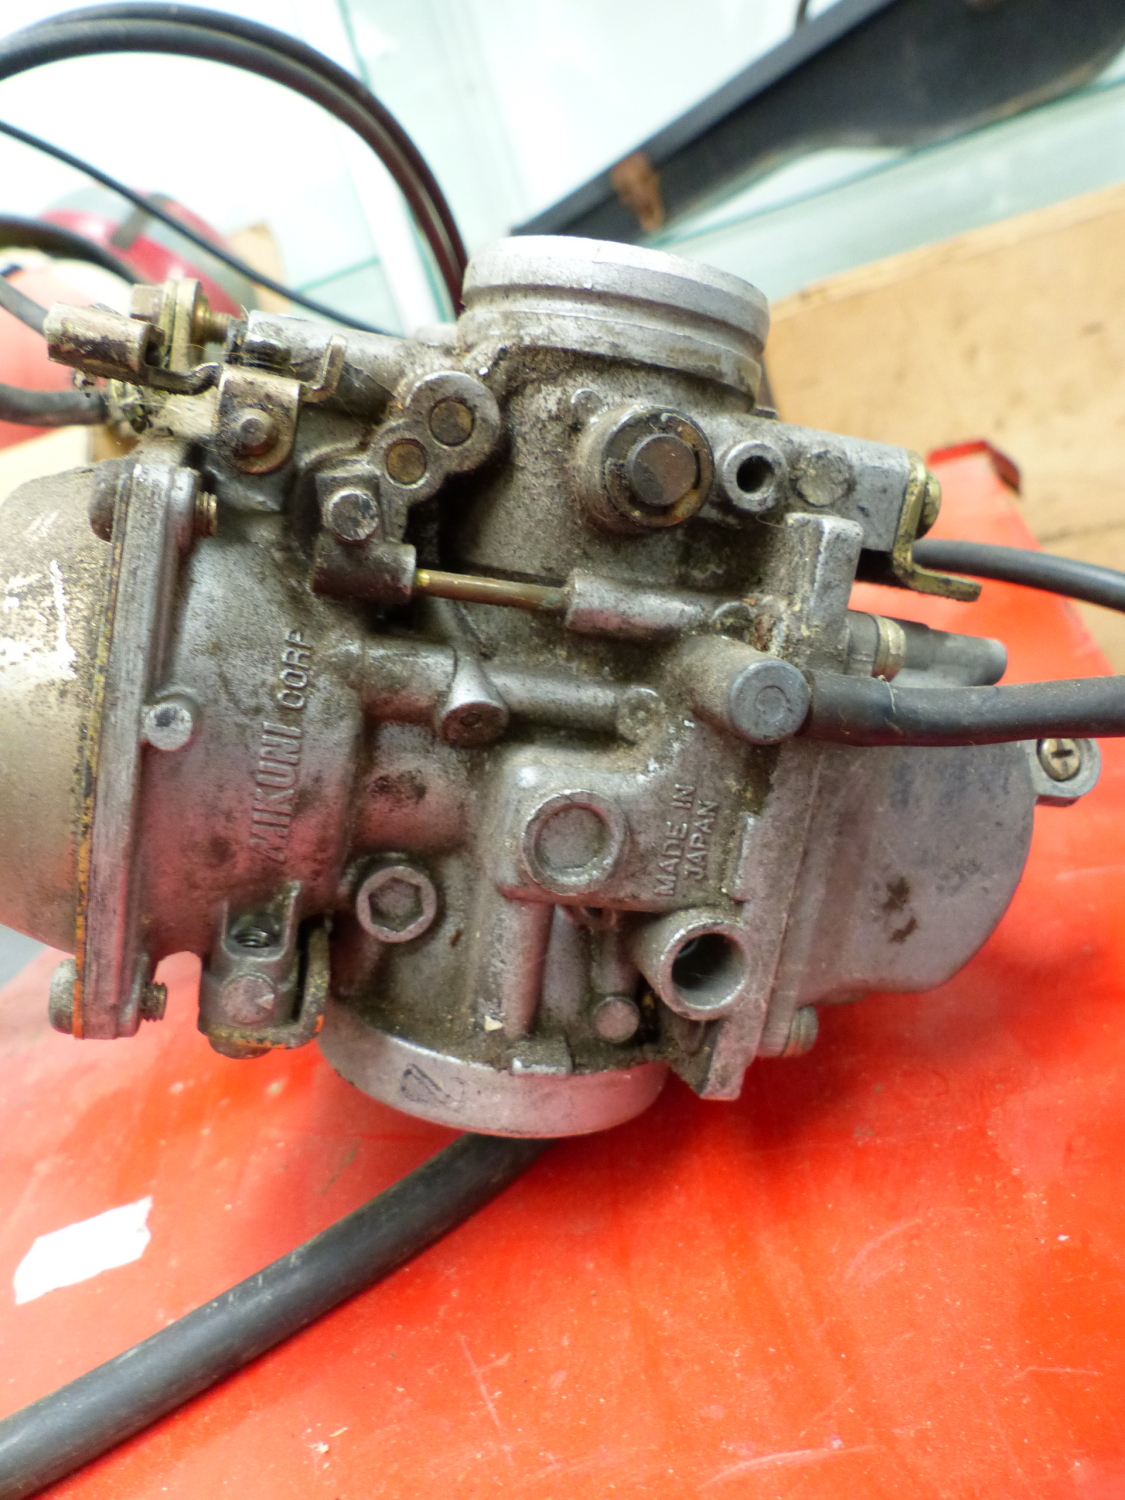 A BANK OF FOUR MIKUNI CARBURETORS AND A BOX OF TOOL AND BIKE SPARES. - Image 2 of 7